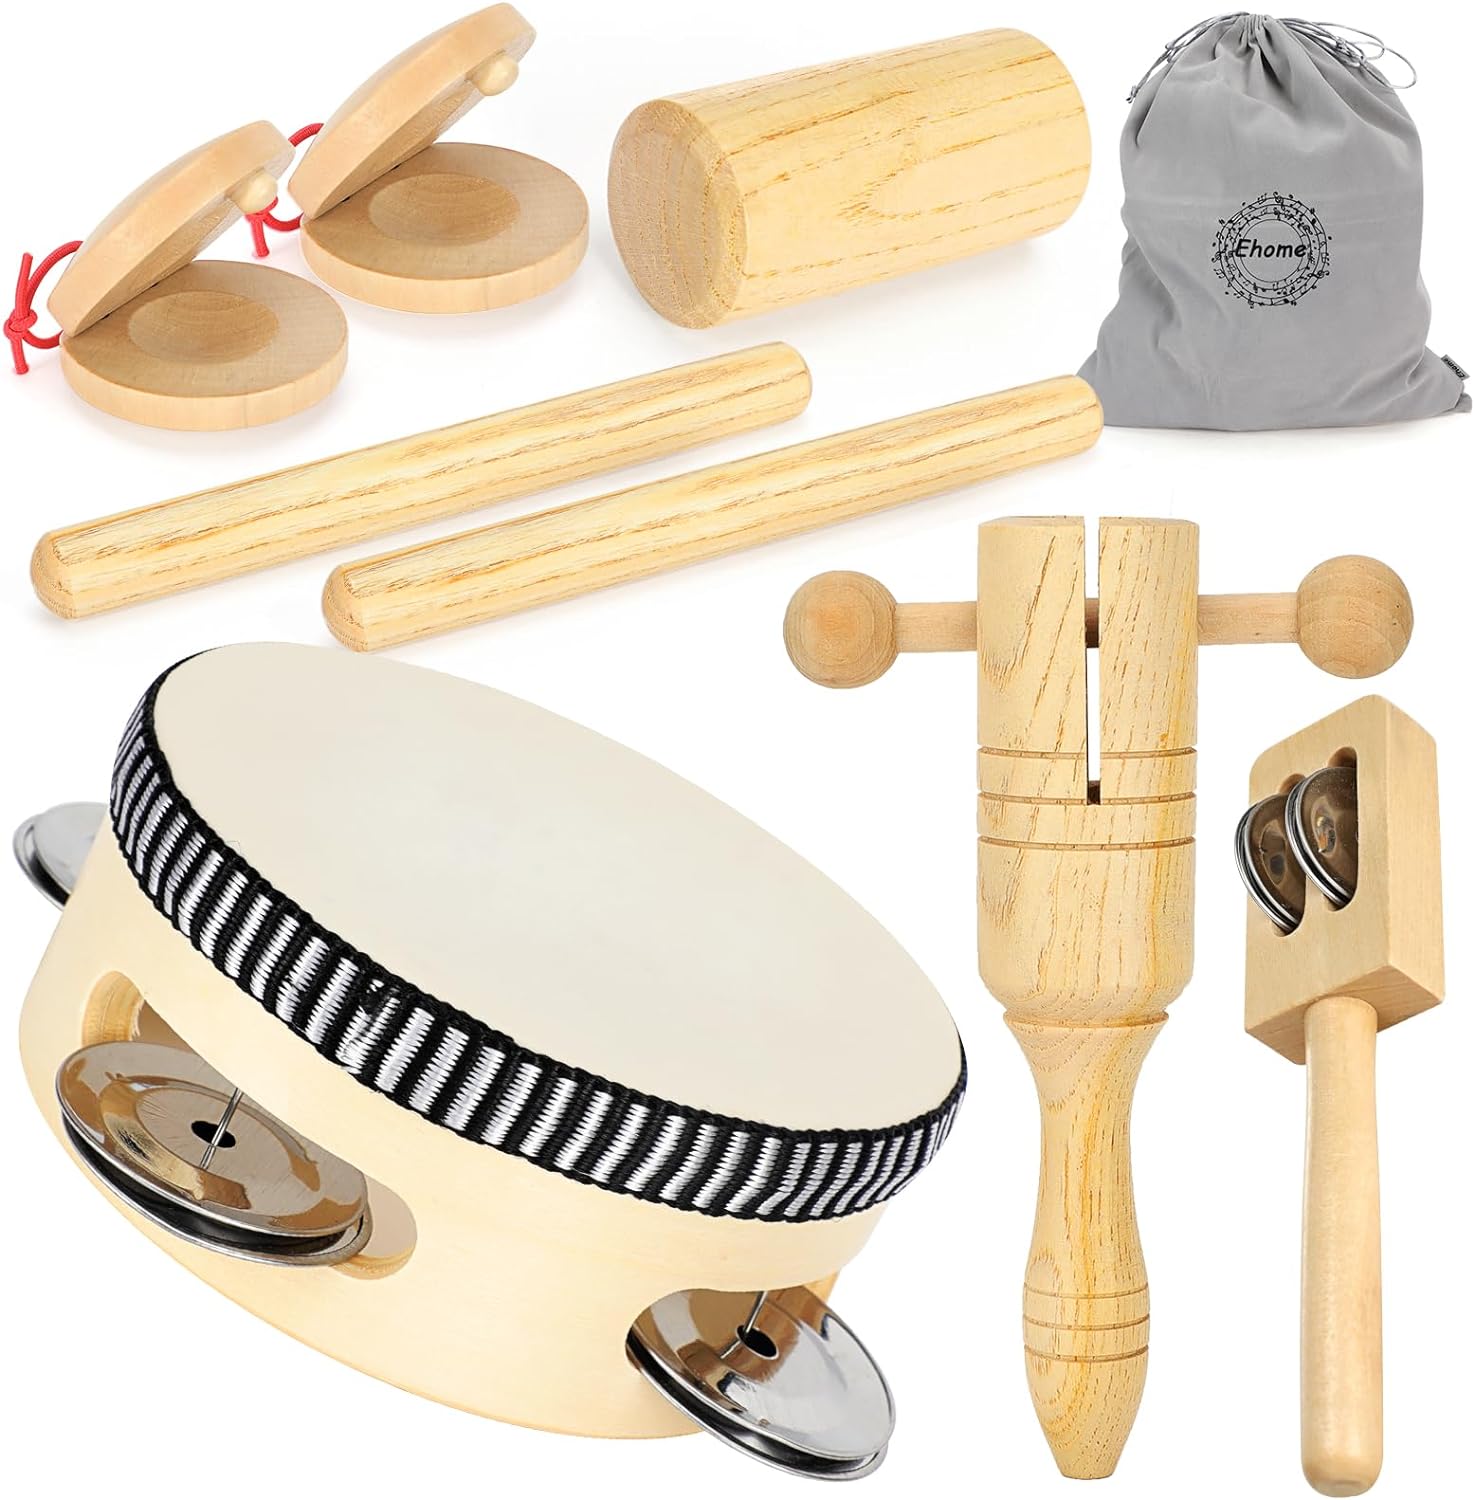 Ehome Toddlers Musical Instruments, Wooden Percussion Kids Baby Musical Instruments, Montessori Musical Toys Set for Kids Childrens Preschool Educational Early Learning with Storage Bag